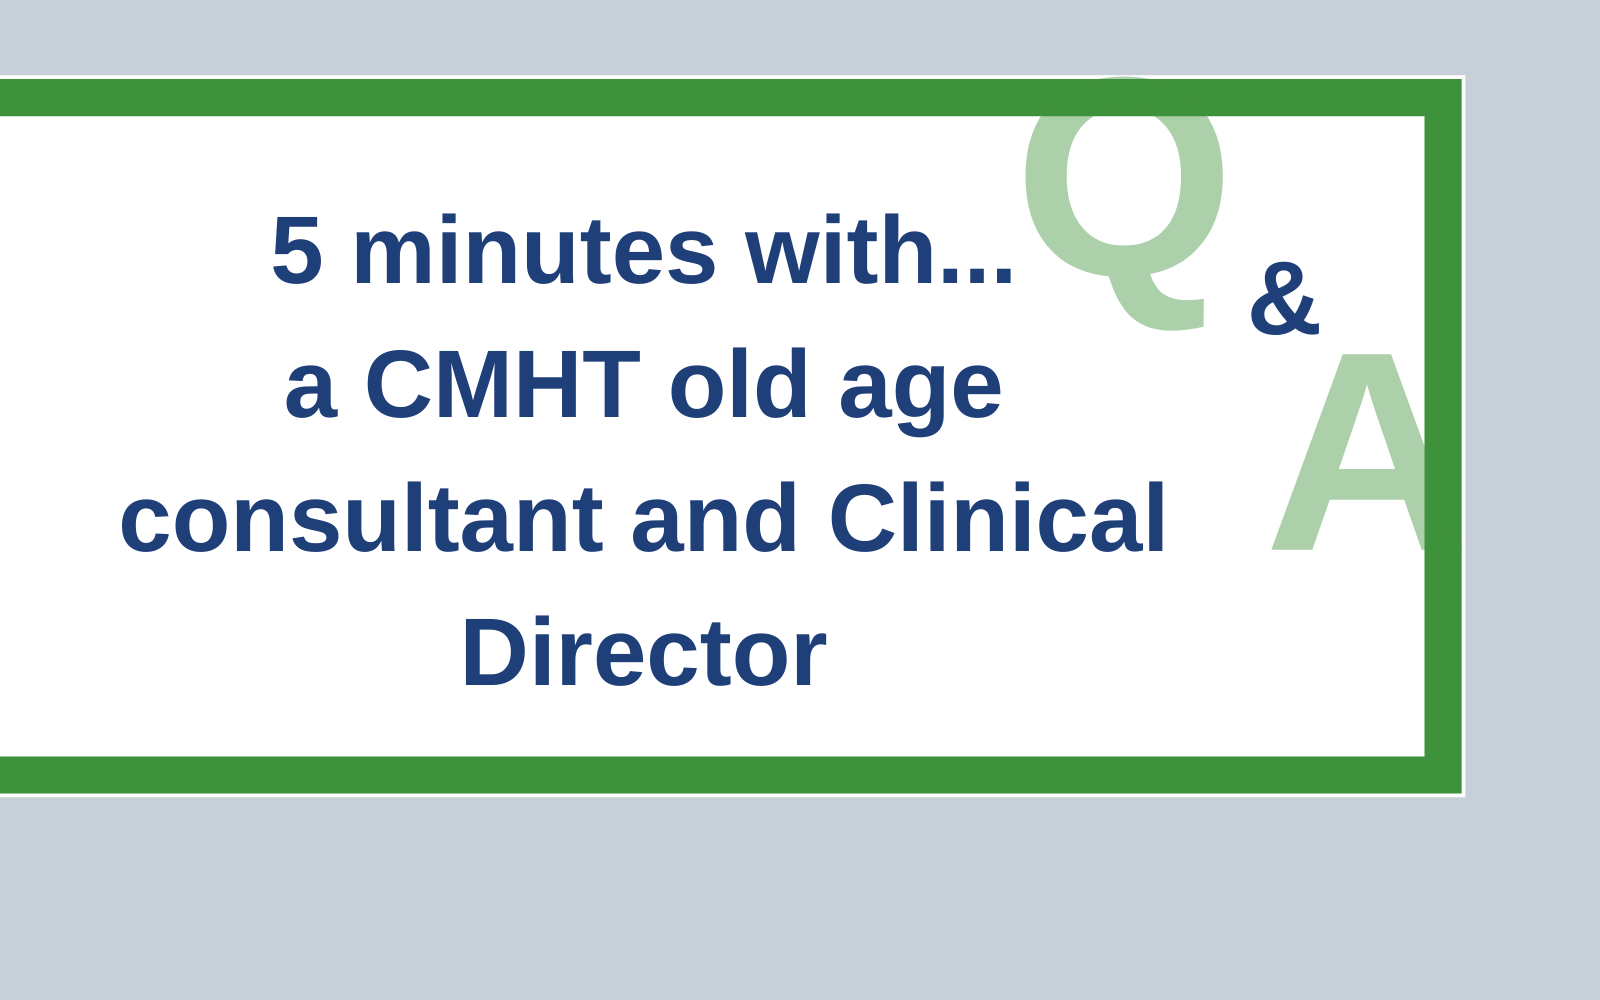 5 minutes with a CMHT old age consultant and Clinical Director - Consultant Connect